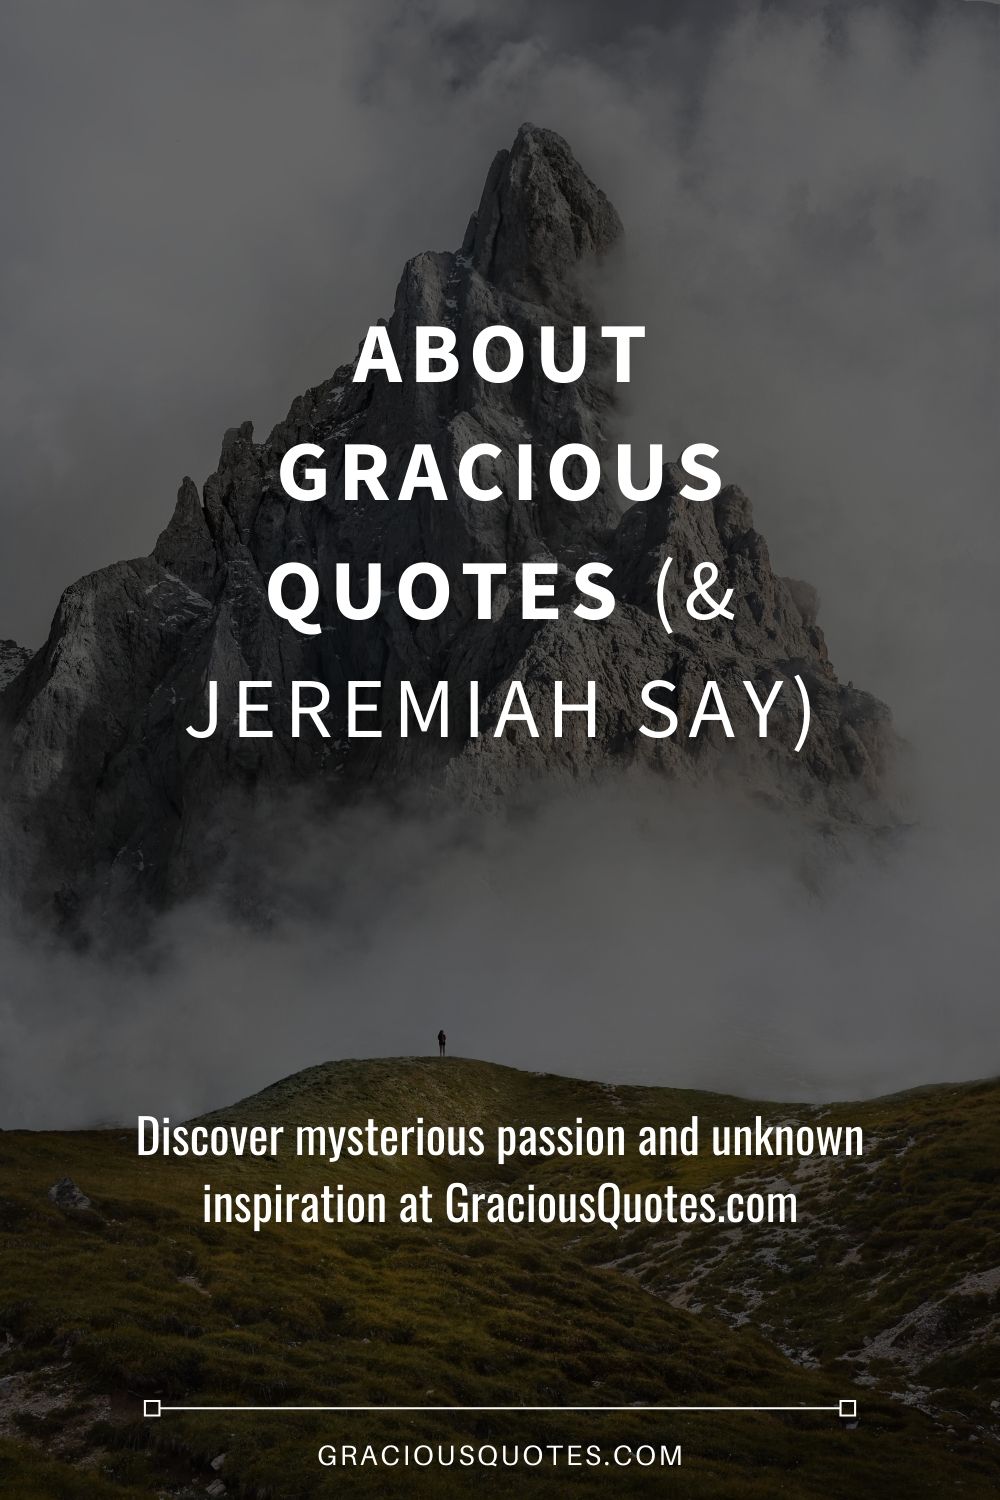 About Gracious Quotes & Jeremiah Say